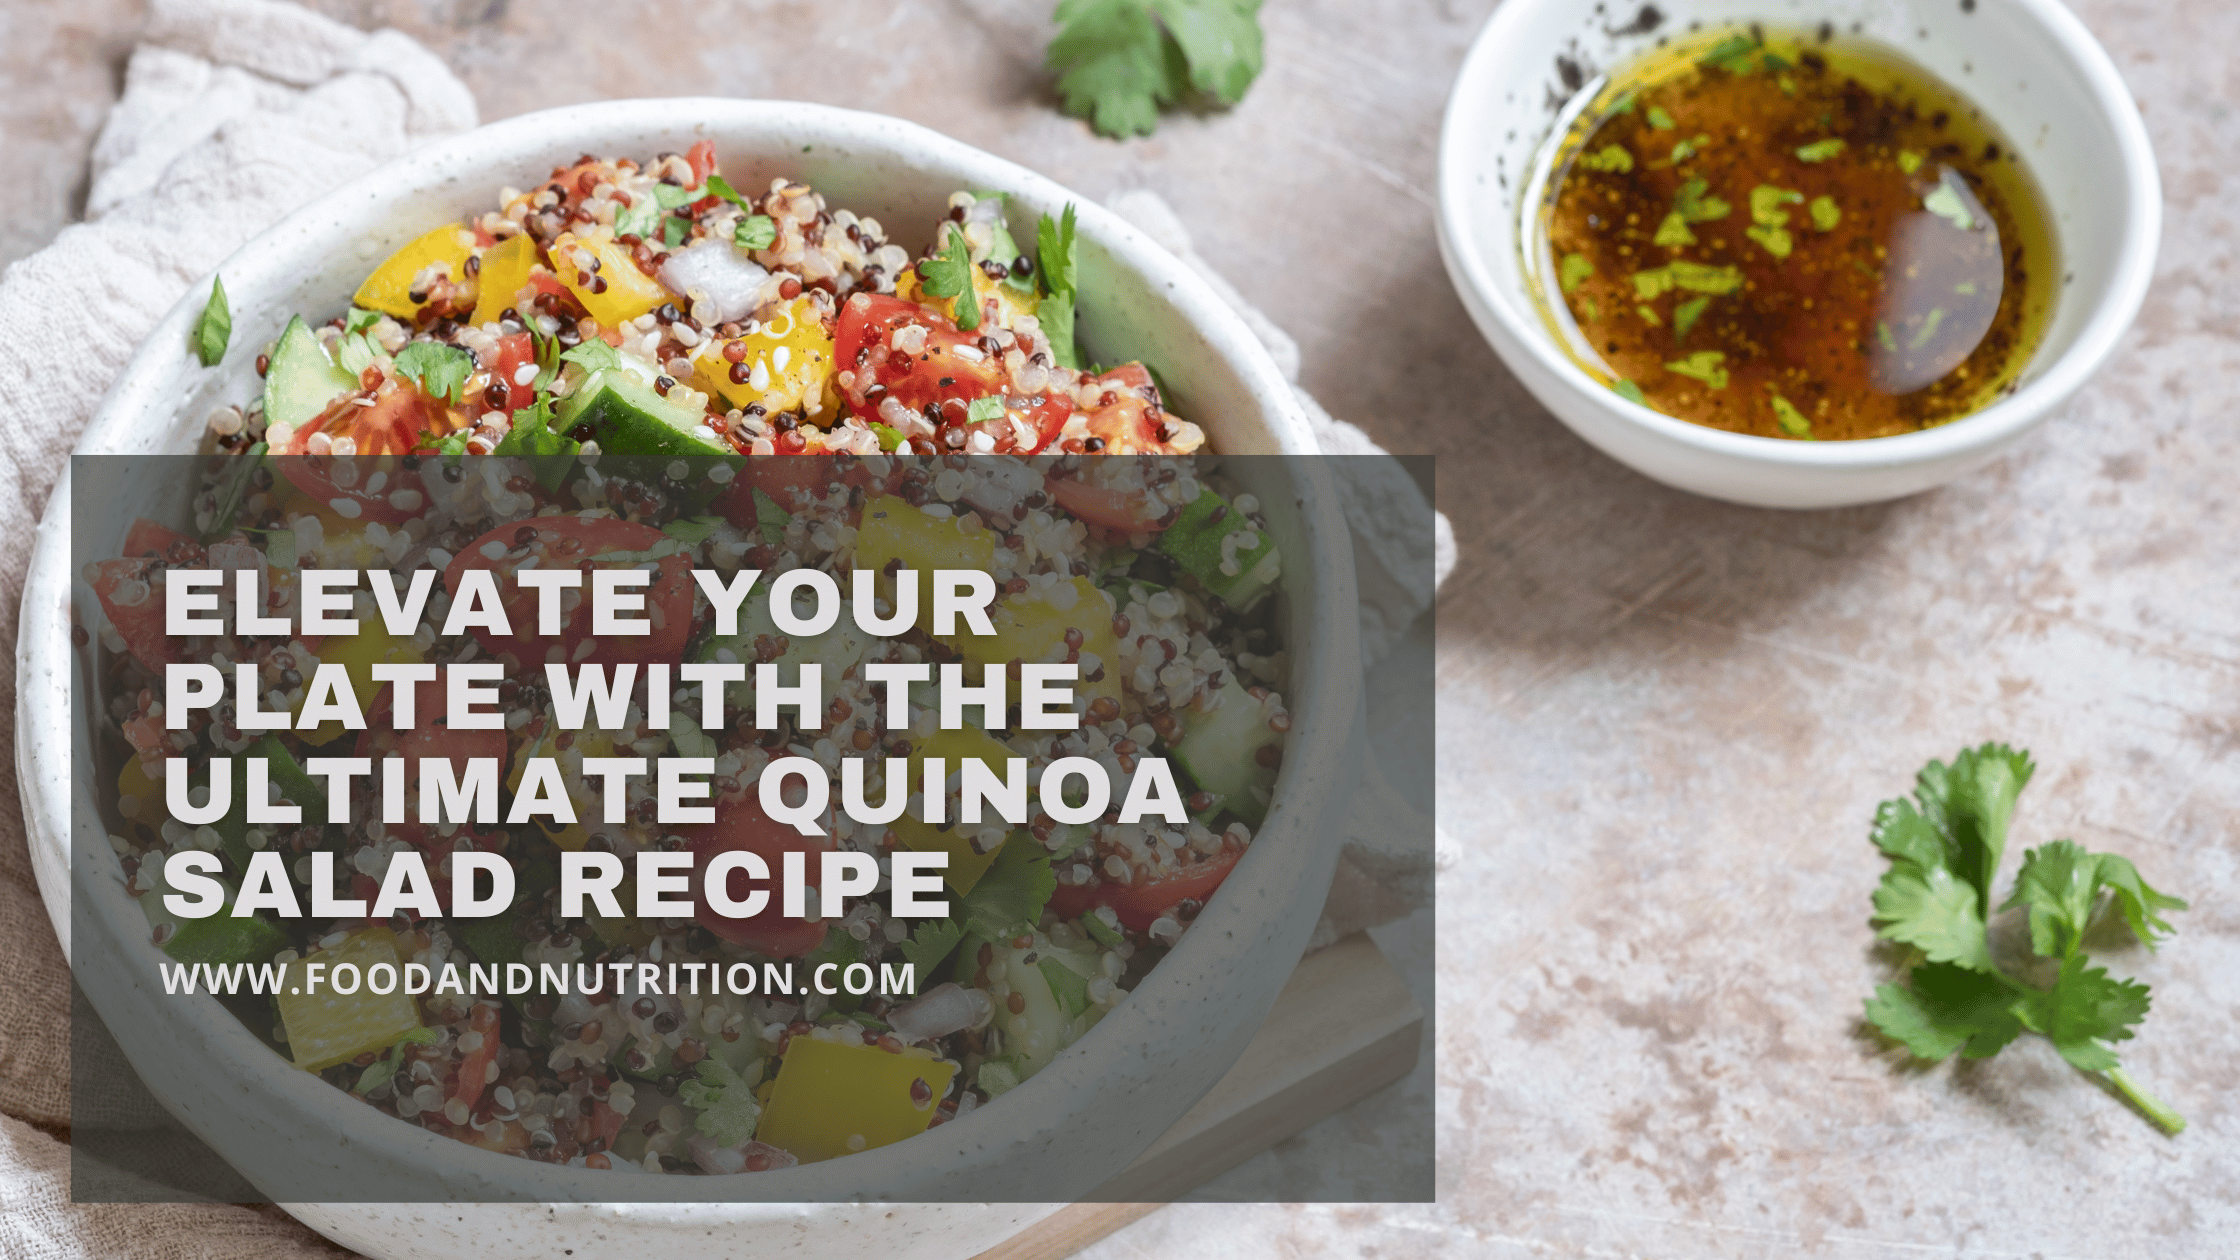 Elevate Your Plate with the Ultimate Quinoa Salad Recipe